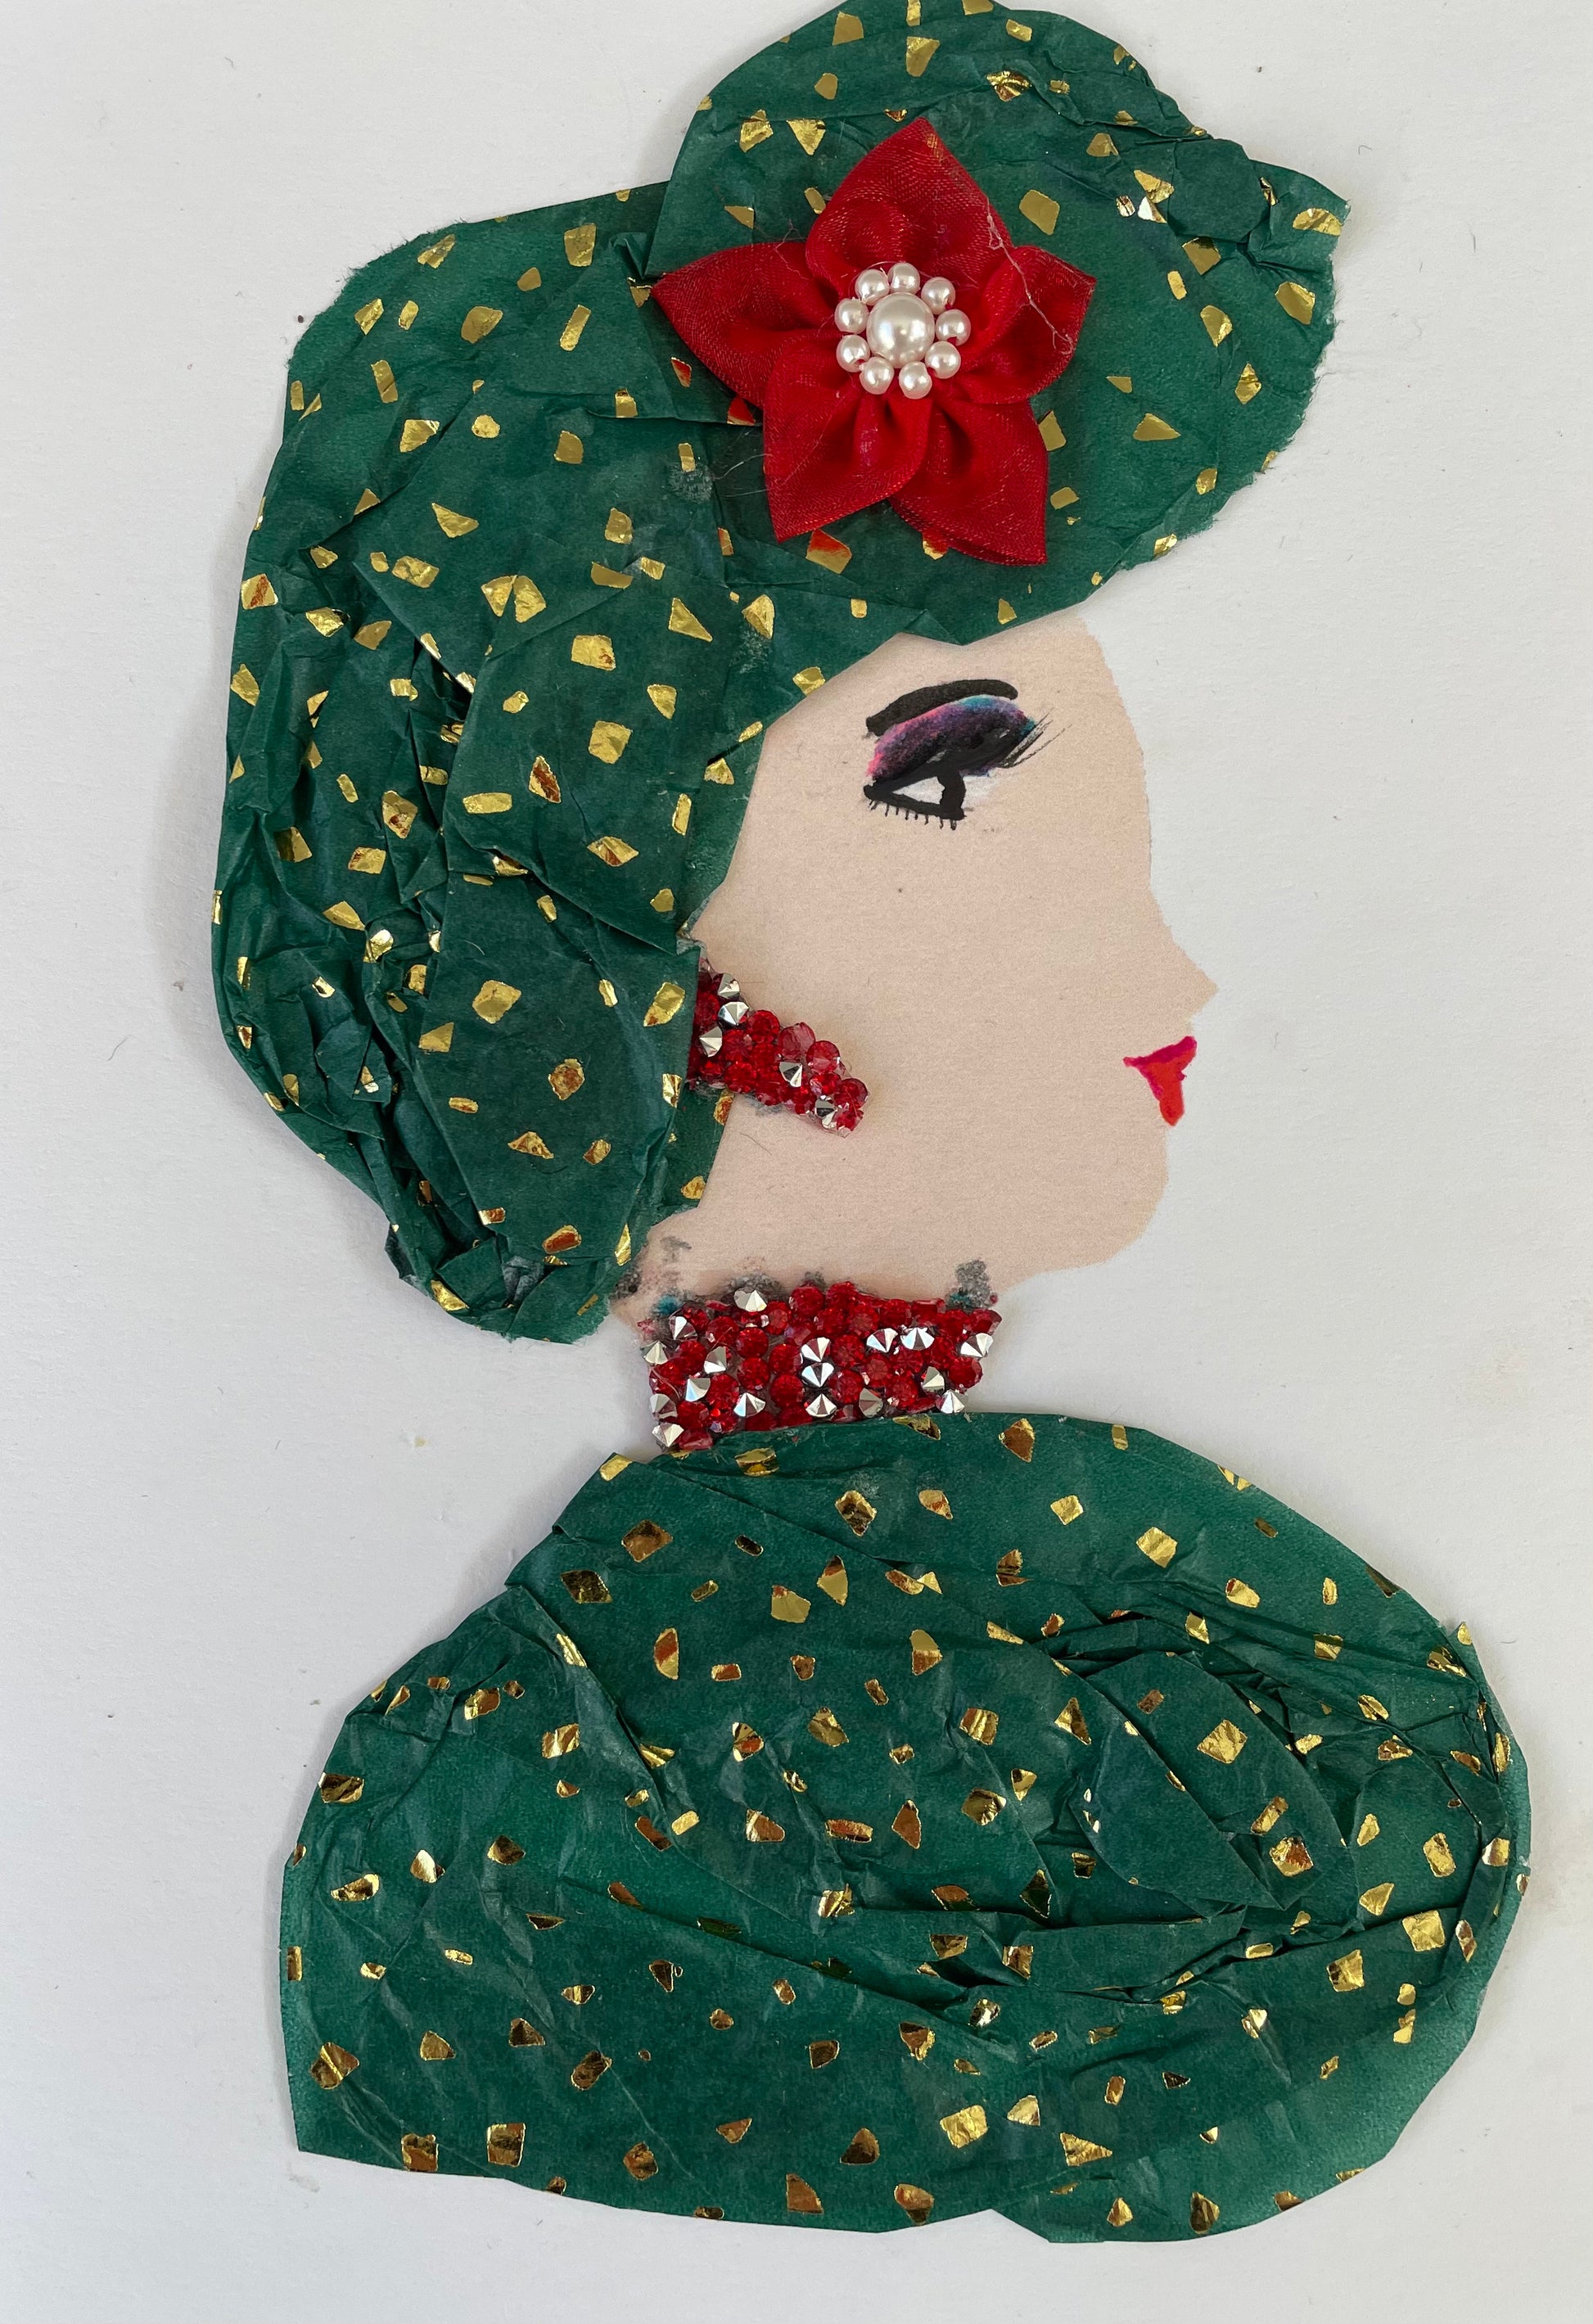 I have called this card Norwood Nina. She is wearing a green blouse with gold patterned confetti on it. Her headpiece is the same print. She has matching earrings and a necklace that are red and silver bead-like pieces. She has a red flower in her headpiece